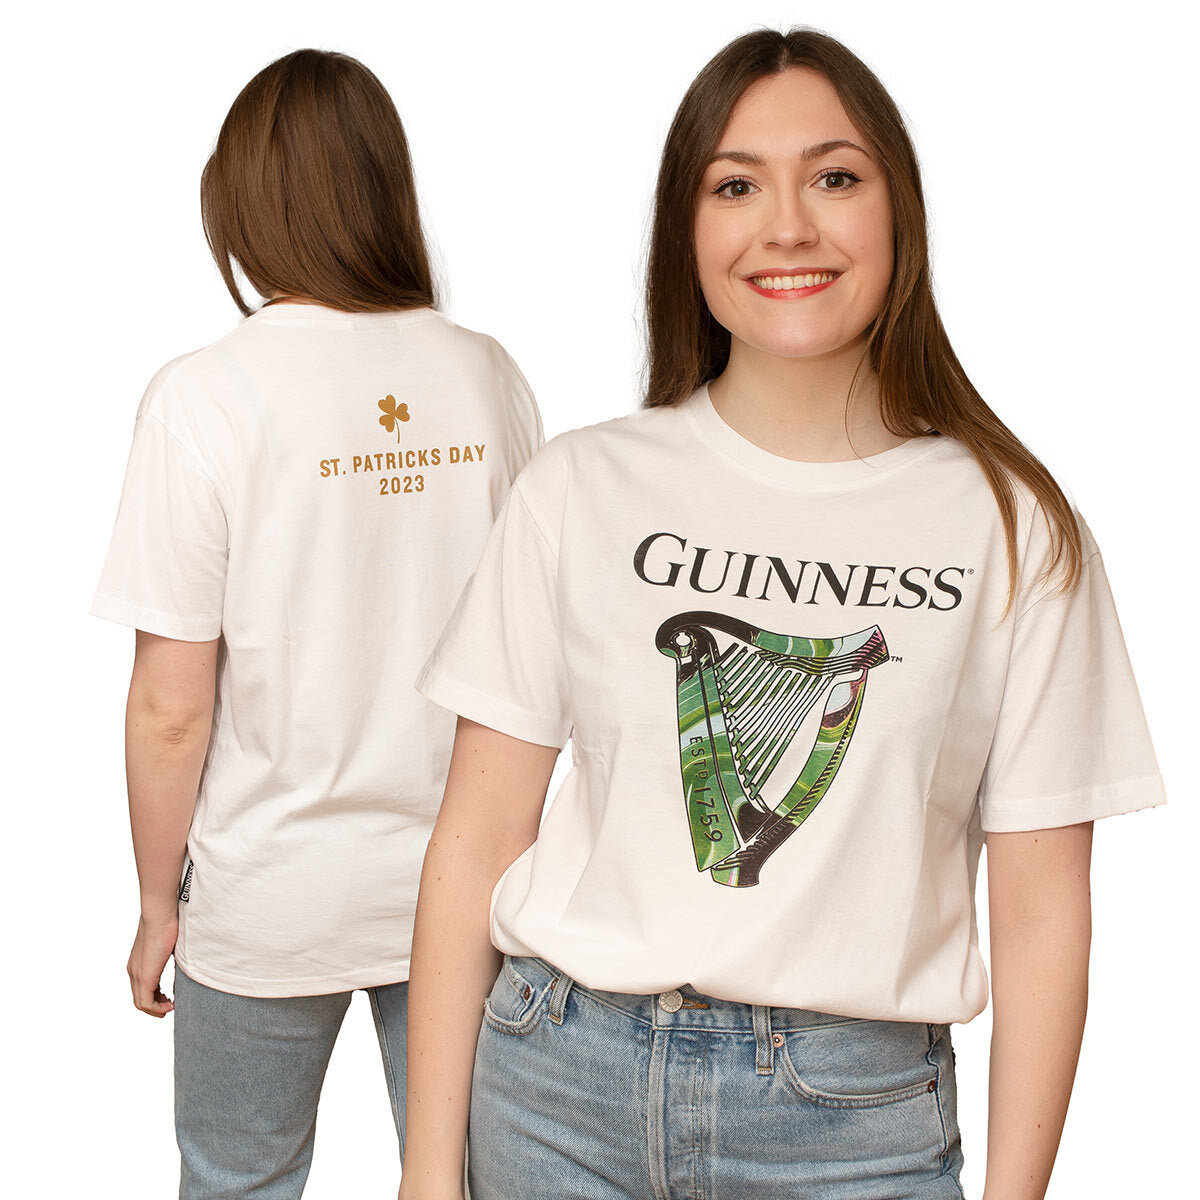 St. Patrick's Day Limited Edition Sweatshirt & White T-shirt Collection